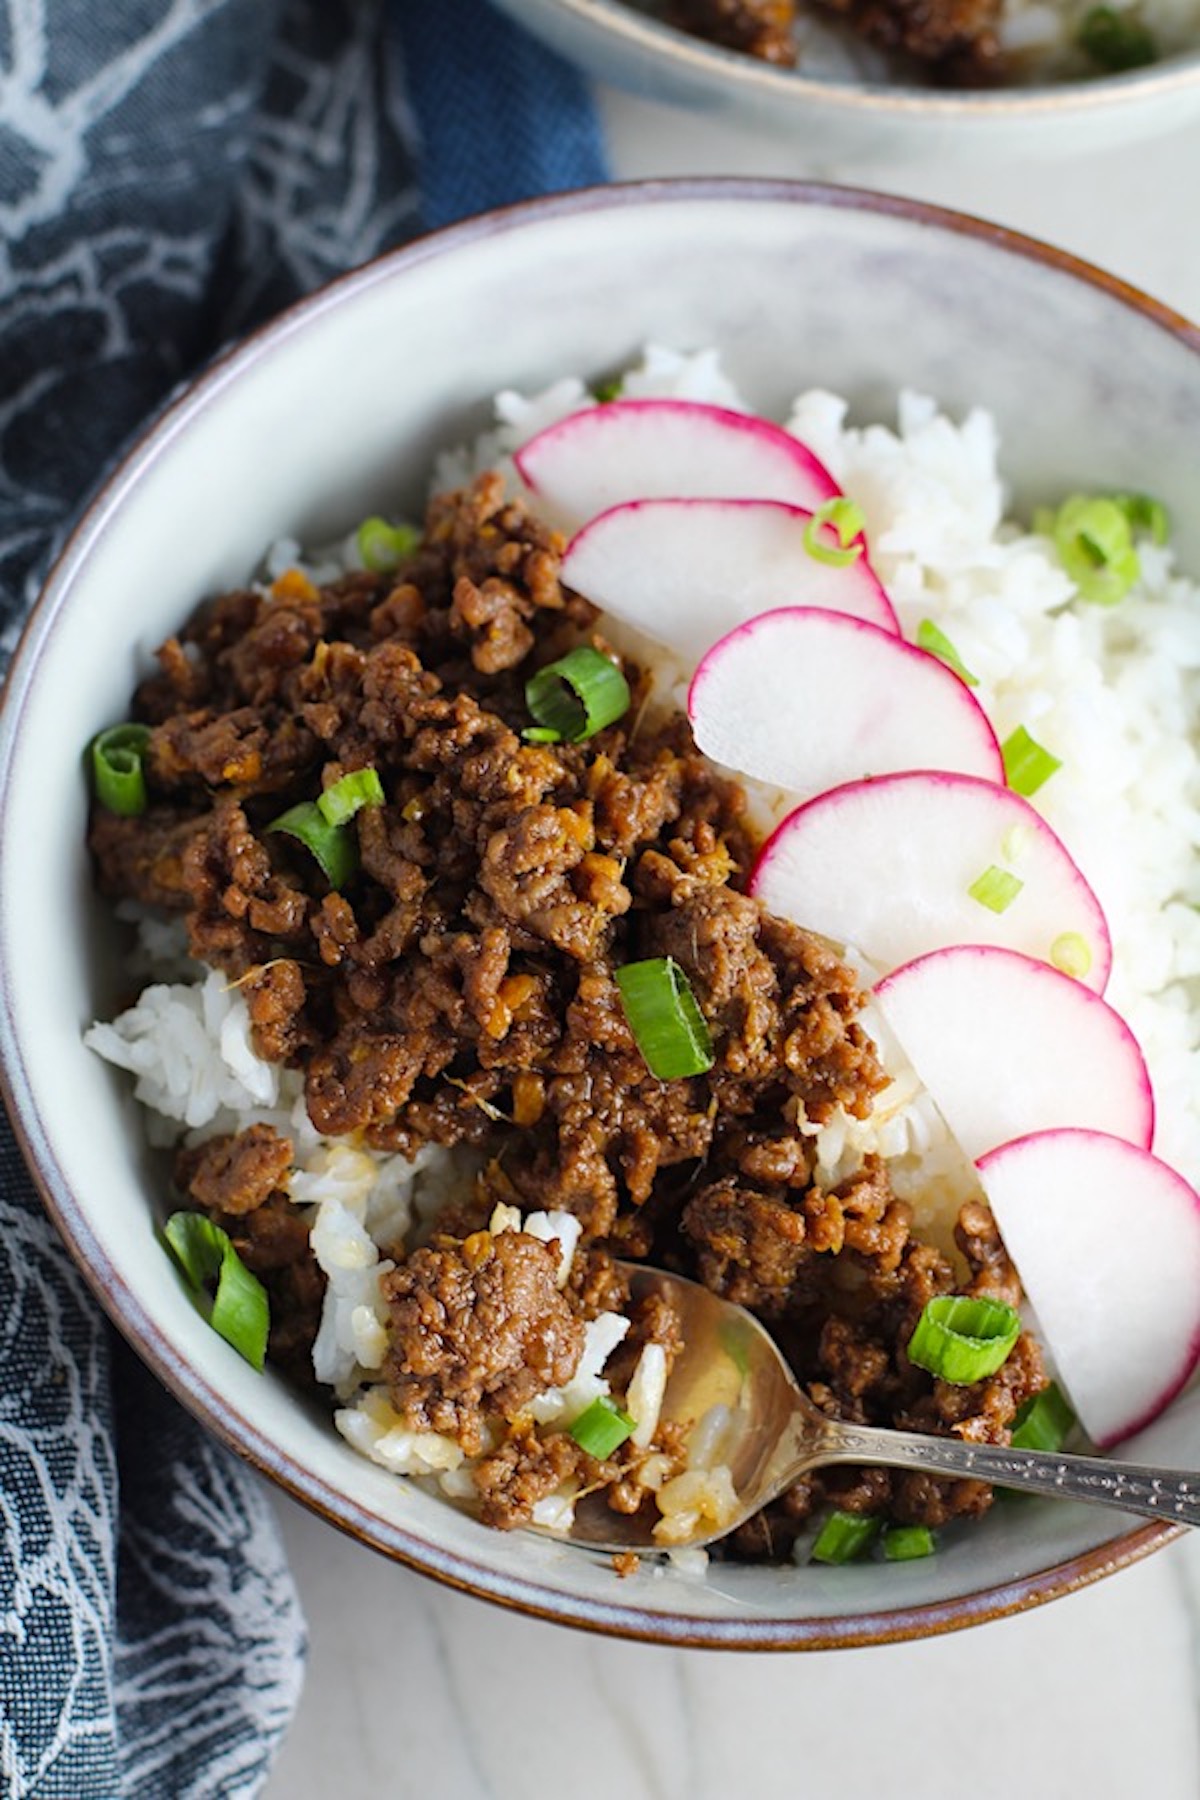 Korean Bulgogi Ground Beef and Rice Bowl with sliced radishes fanned out on top and scallion garnish.